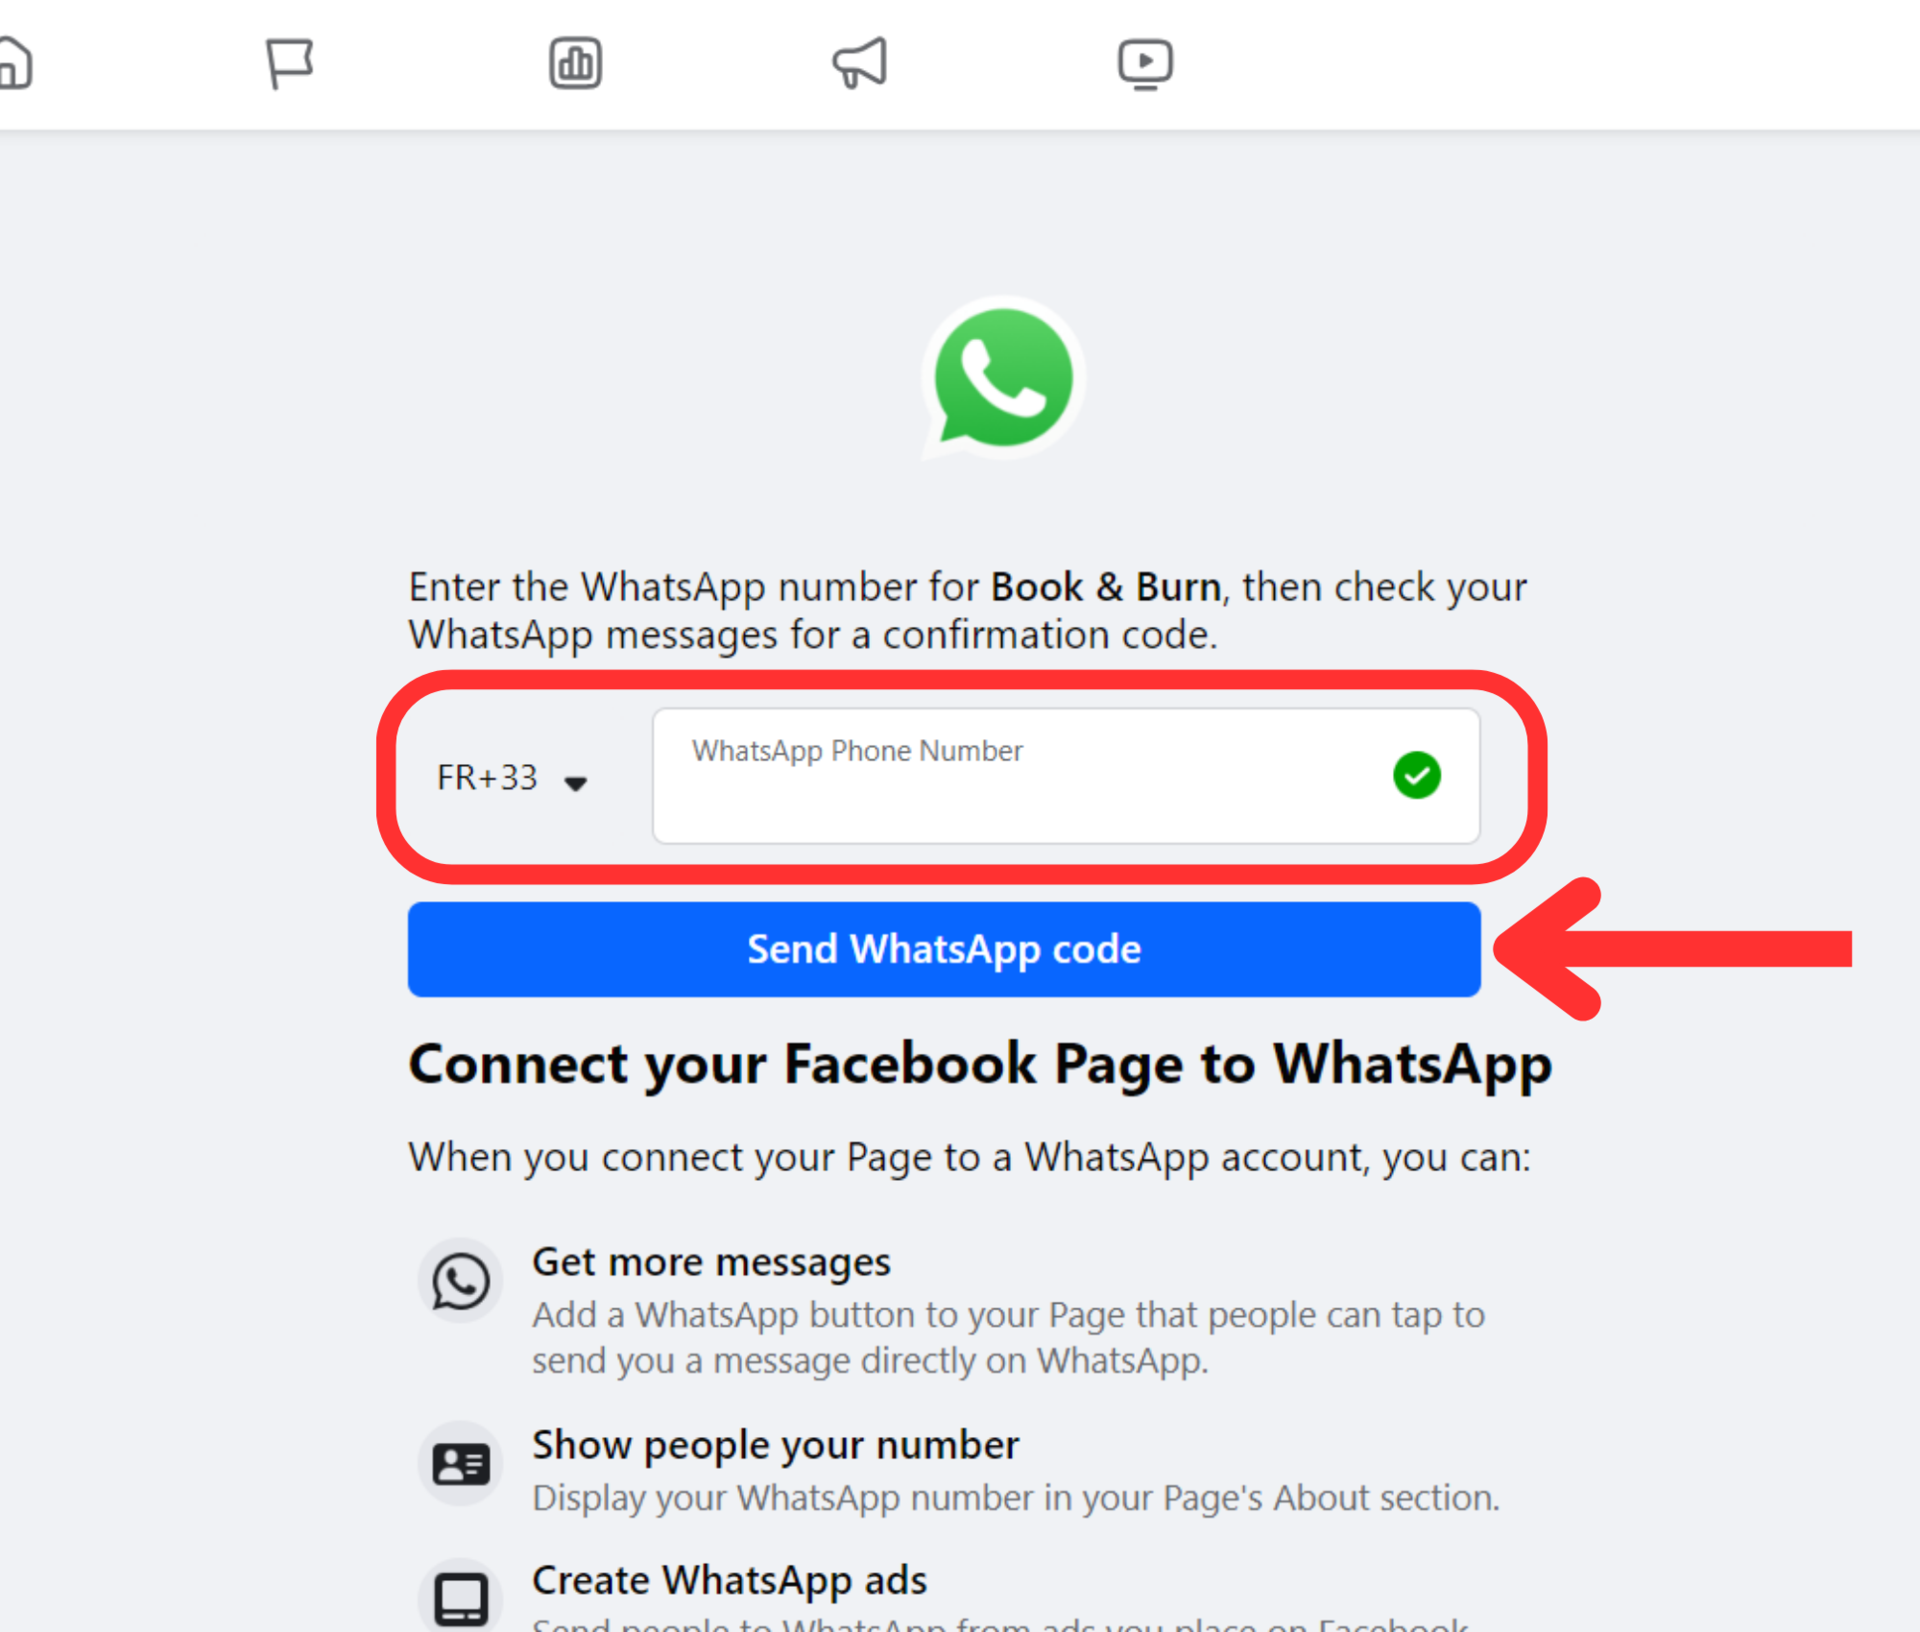 facebook page settings linked accounts whatsapp send code buttom